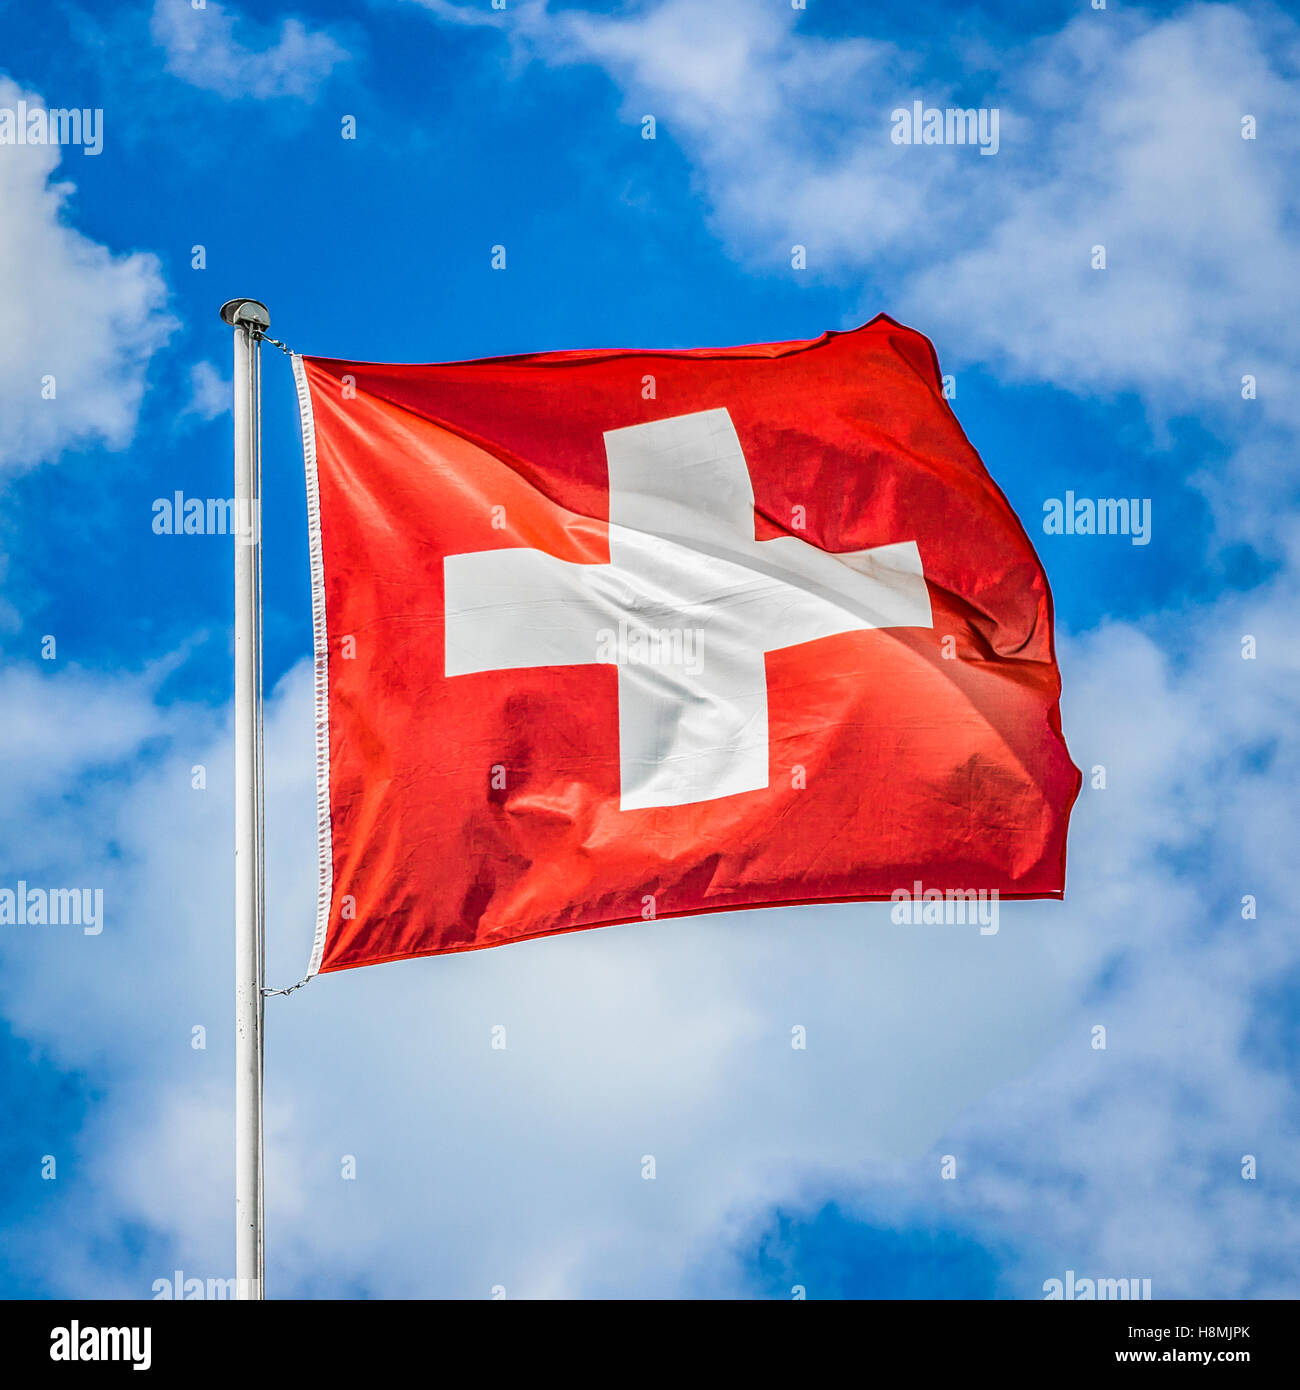 Classic view of the national flag of Switzerland waving in the wind against a blue sky with clouds on a sunny day Stock Photo